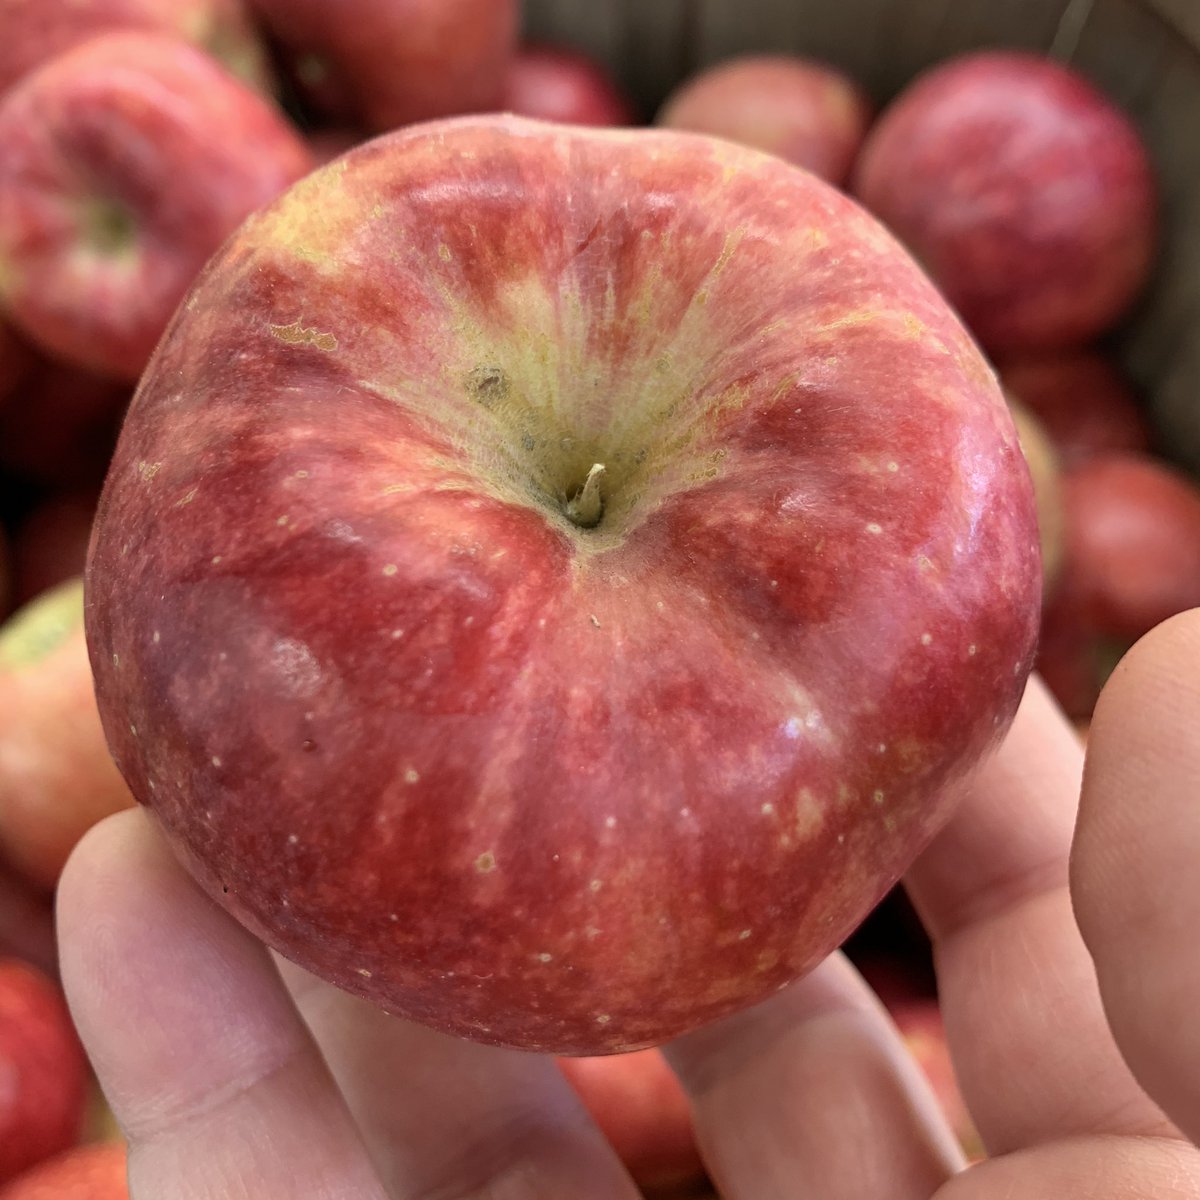 Keepsake, Minnesota 1978. Child of Malinda and Northern Spy, parent of Honeycrisp.A very tasty little apple, with a more textured bite than Honeycrisp - bursting with sugar-melon flavor and a sassy little kick. Yum! 8.5/10